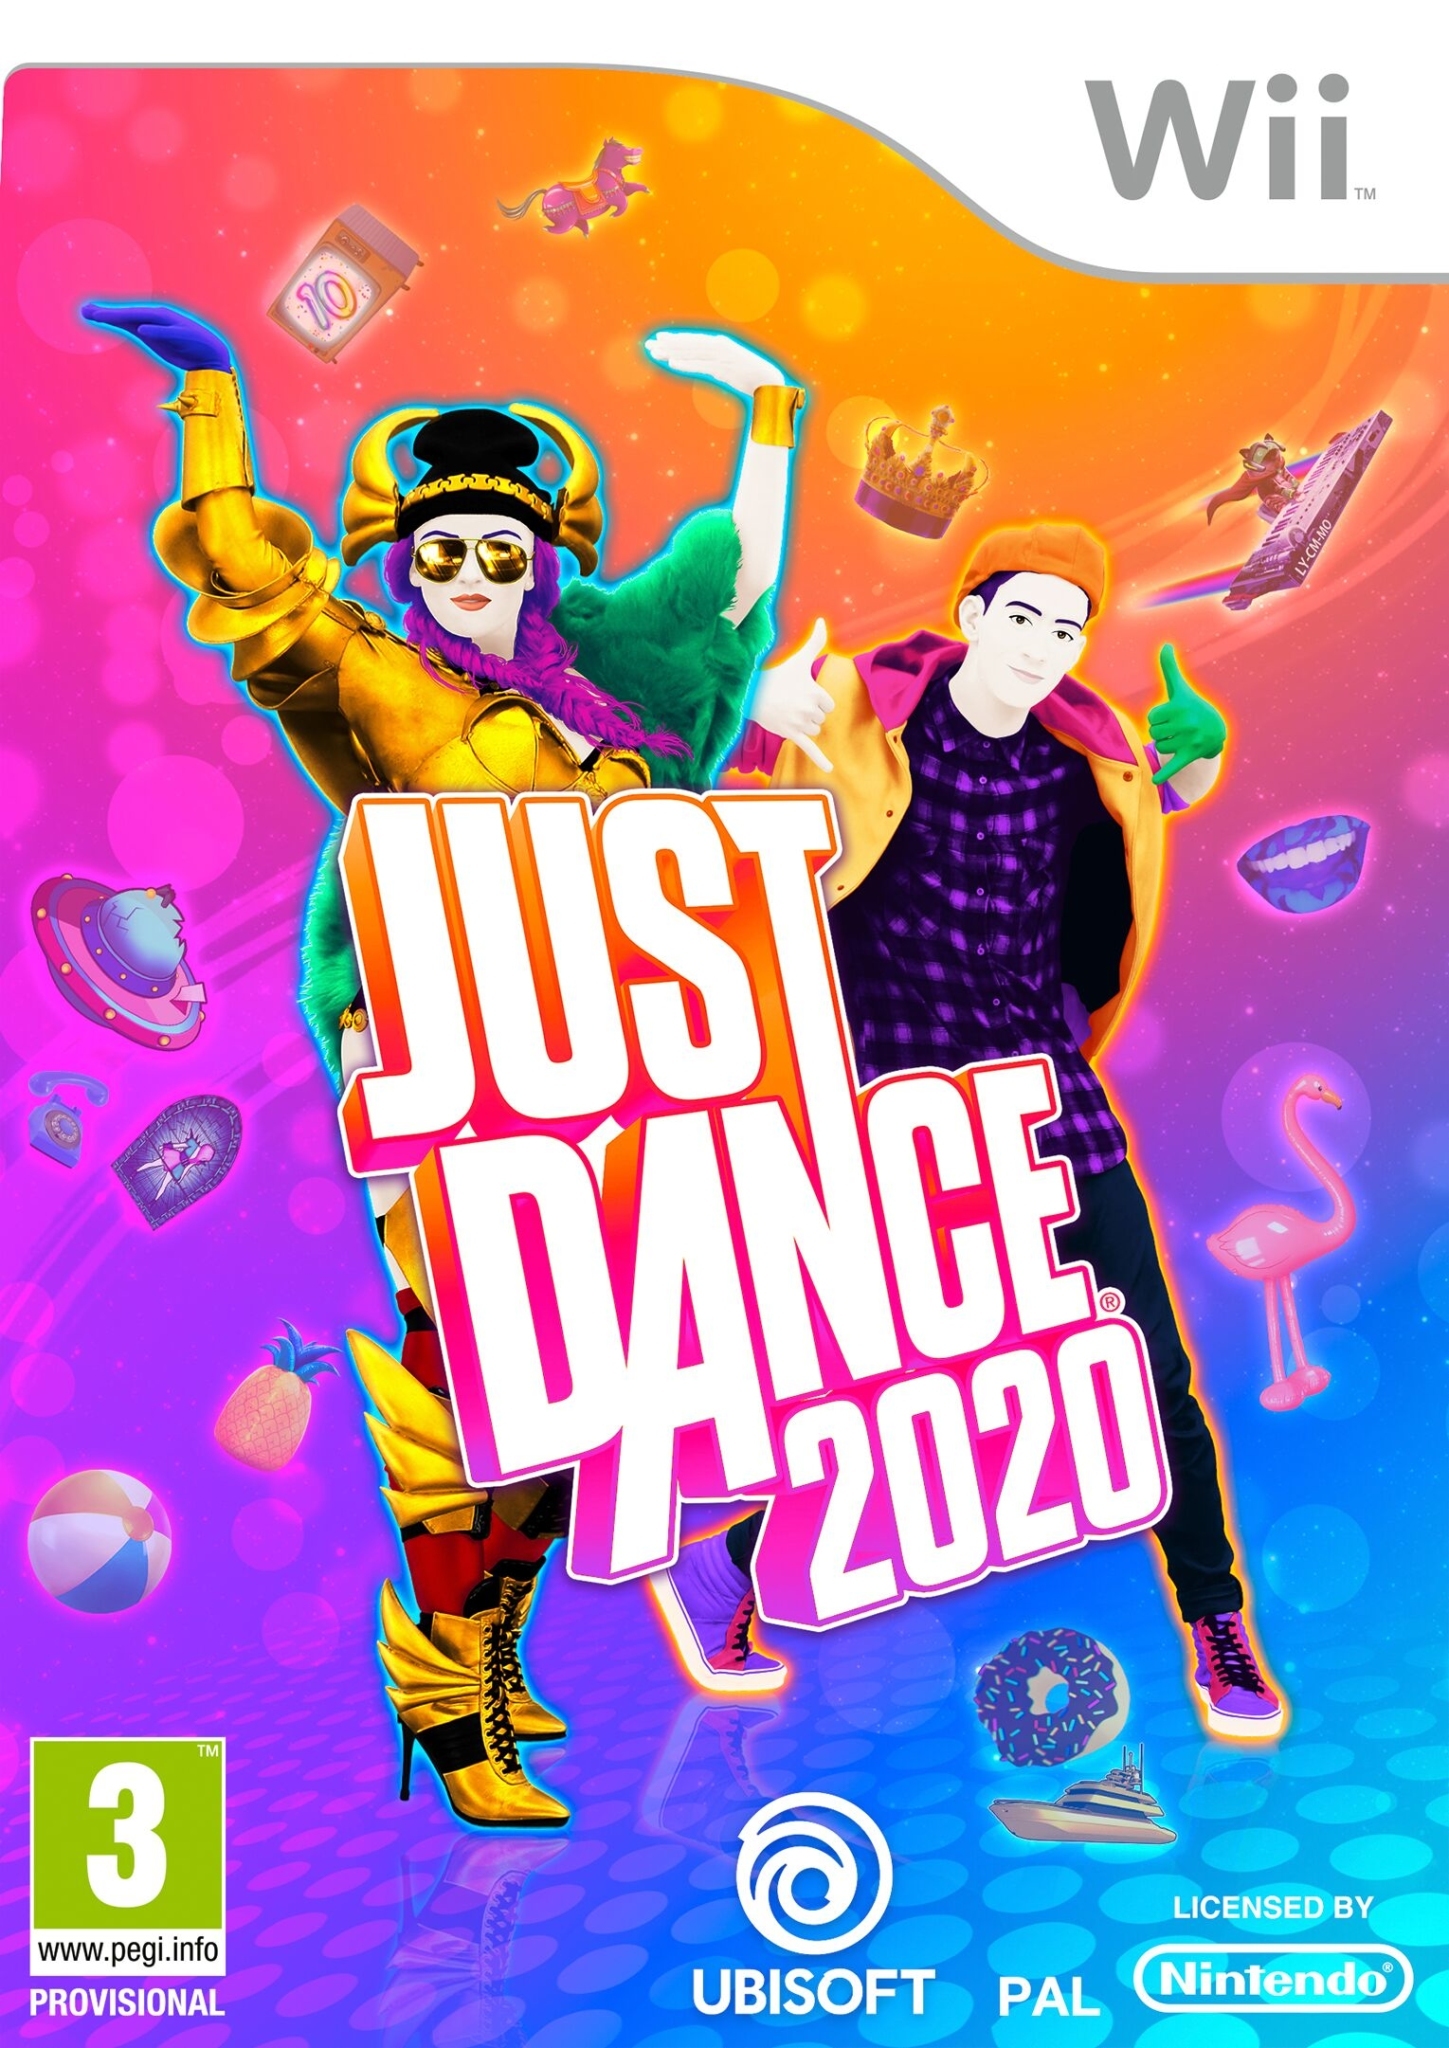 will just dance 2021 be on unlimited